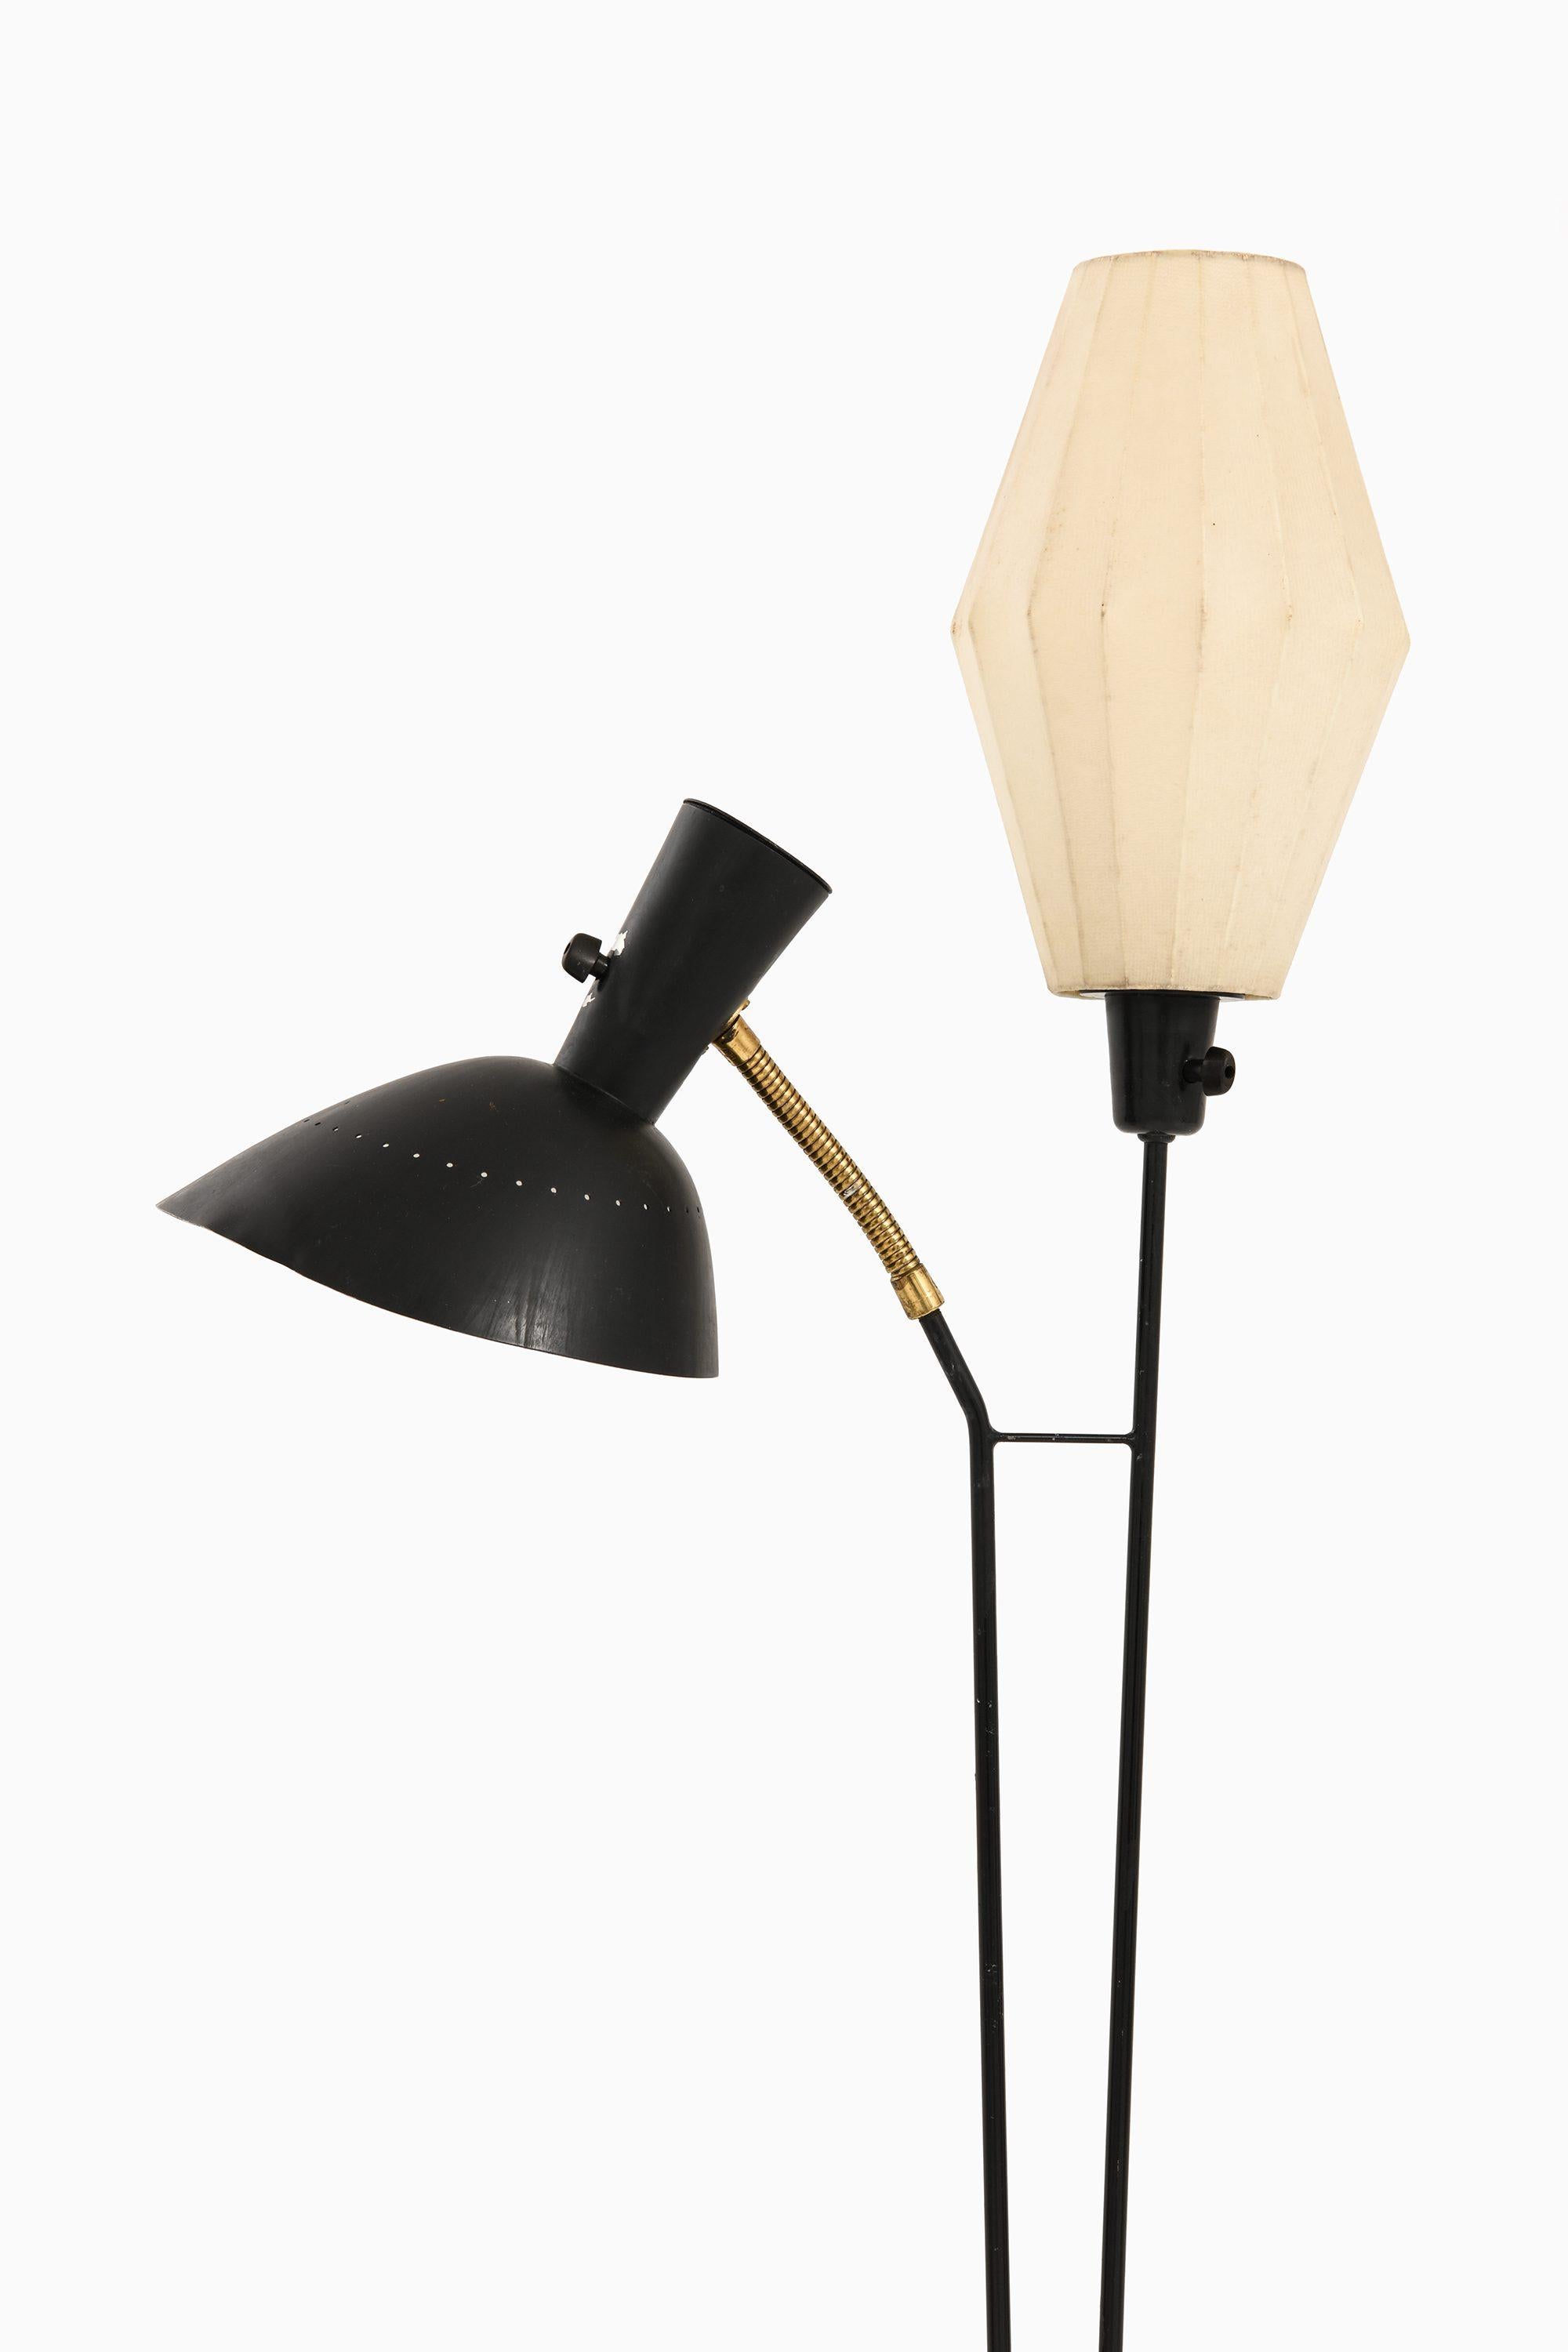 Floor Lamp in Black Lacquered Metal by Hans Bergström, 1950's

Additional Information:
Material: Black lacquered metal
Style: Mid century, Scandinavian
Produced by Ateljé Lyktan in Åhus, Sweden
Dimensions (W x D x H): 55 x 22 x 152 cm
Condition: